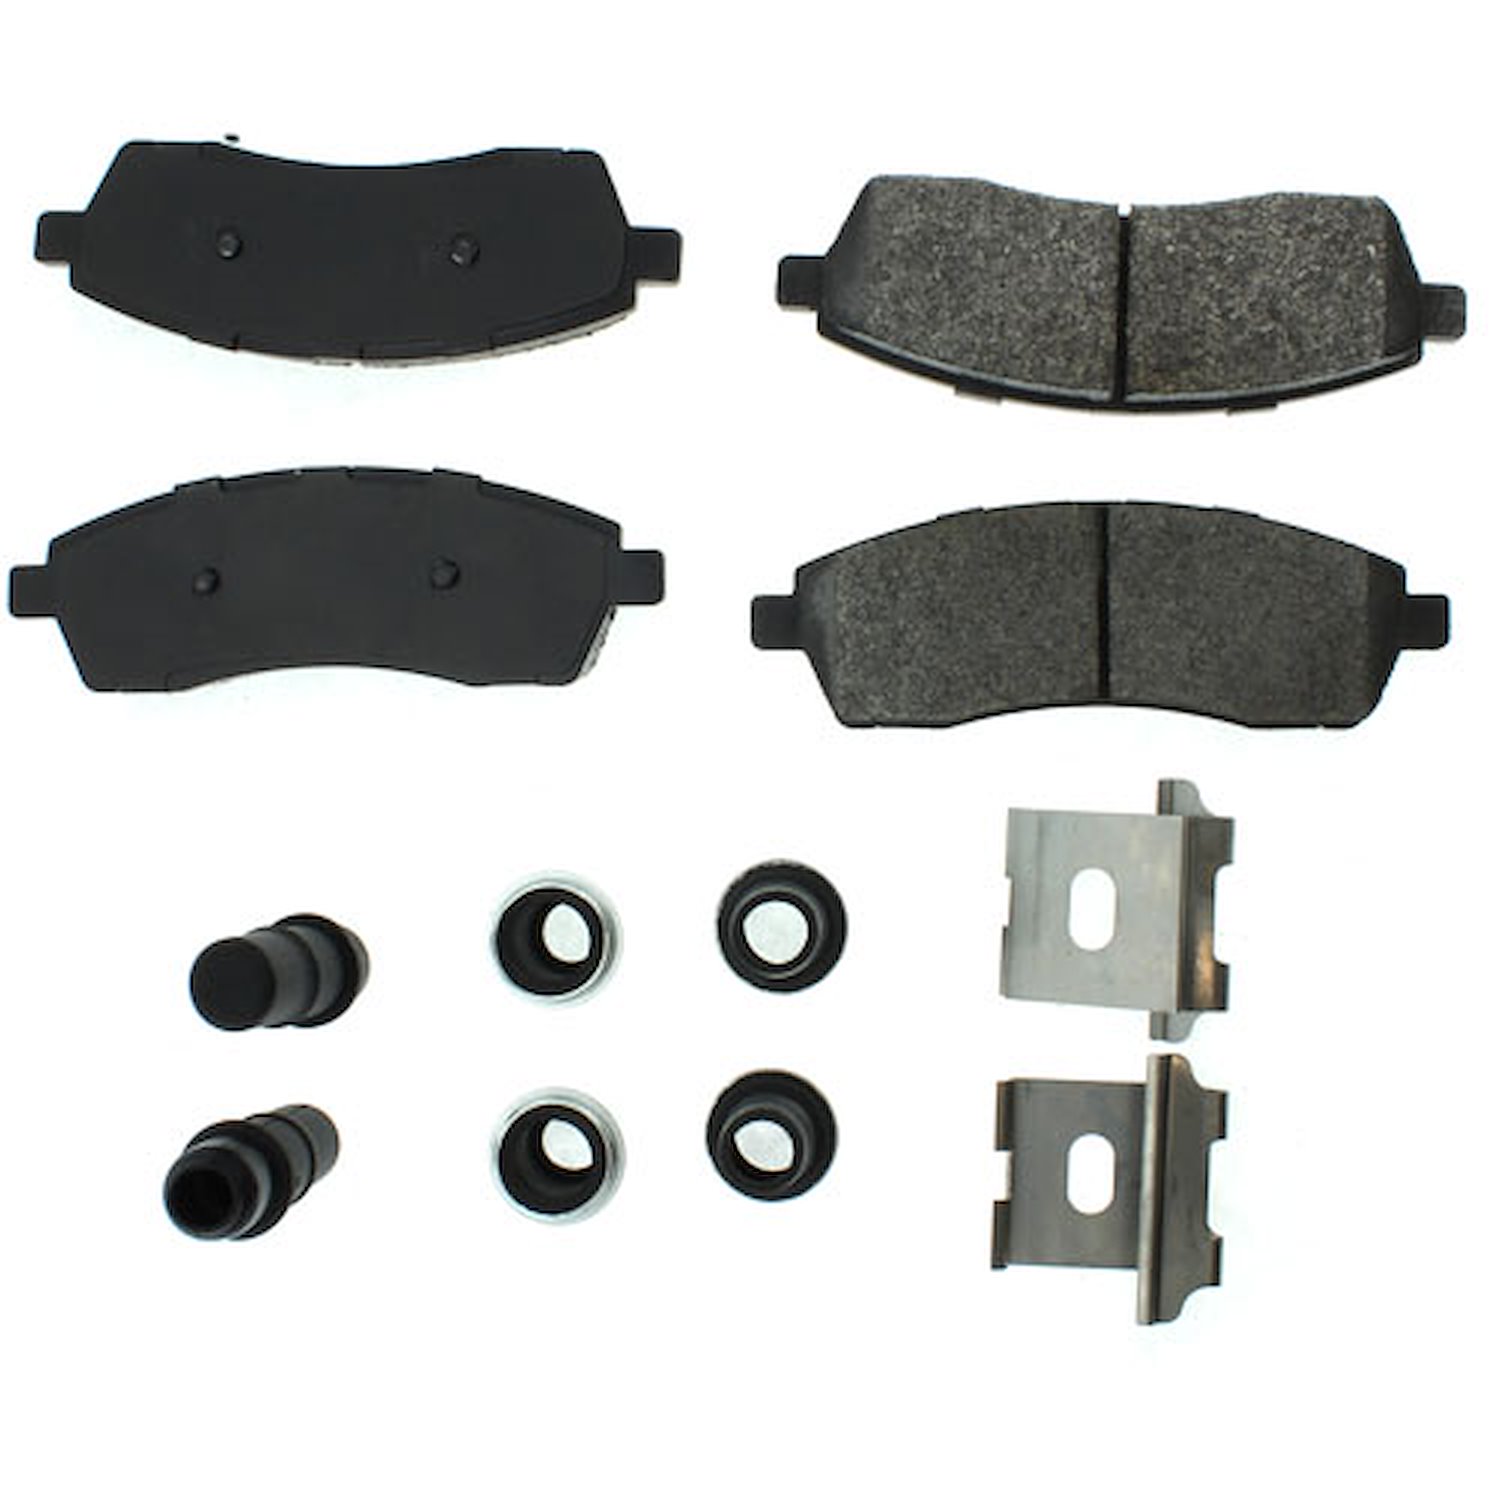 PosiQuiet Extended Wear 1999-2005 Ford Excursion F-250 Super